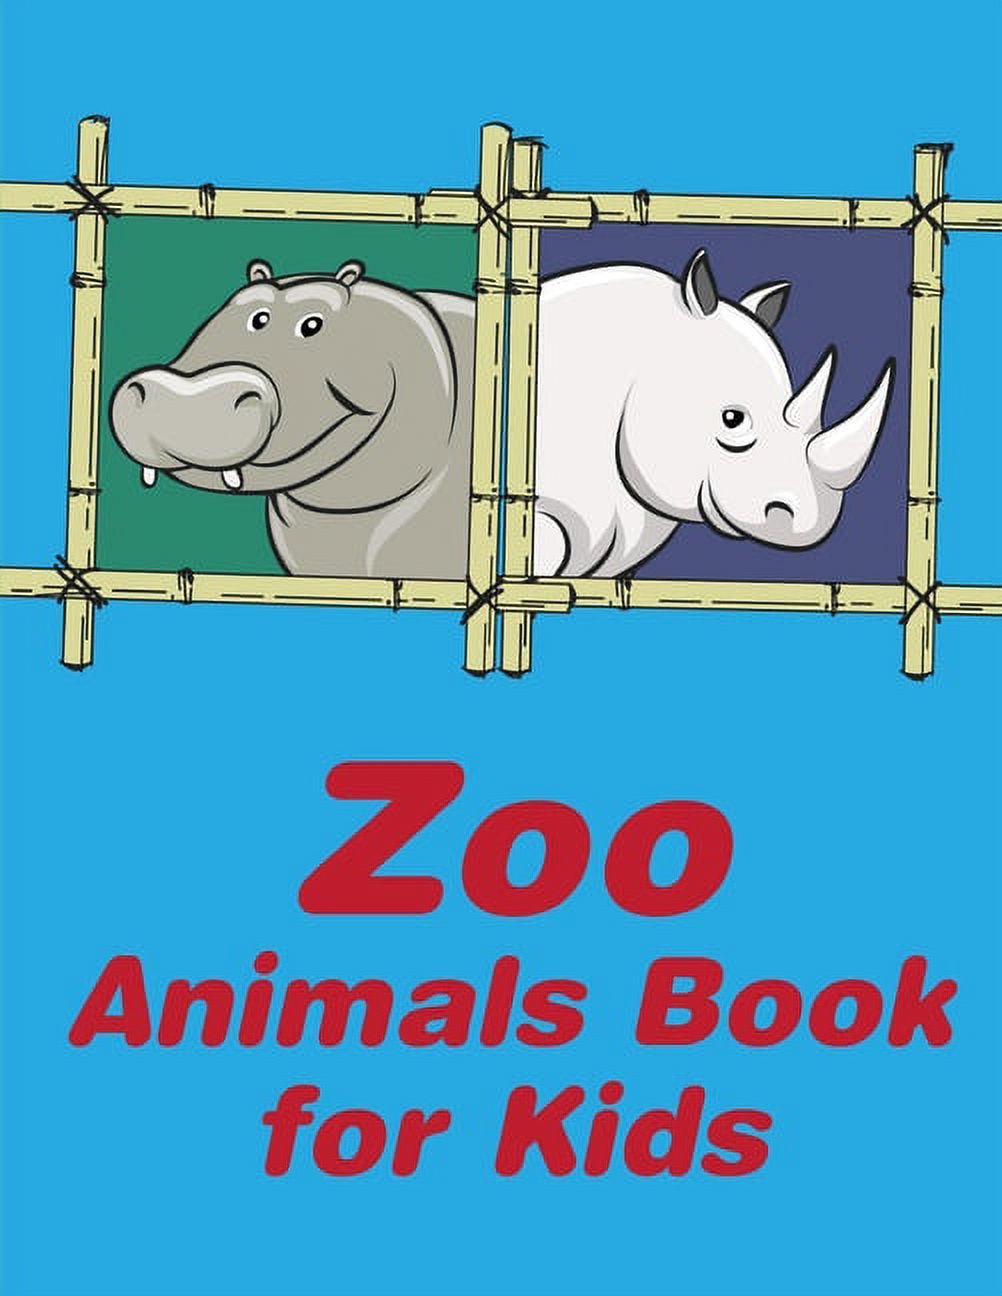 Funny Gift Ideas: Zoo Animals Book For Kids: A Coloring Pages with Funny and Adorable Animals Cartoon for Kids, Children, Boys, Girls (Paperback) - image 1 of 1